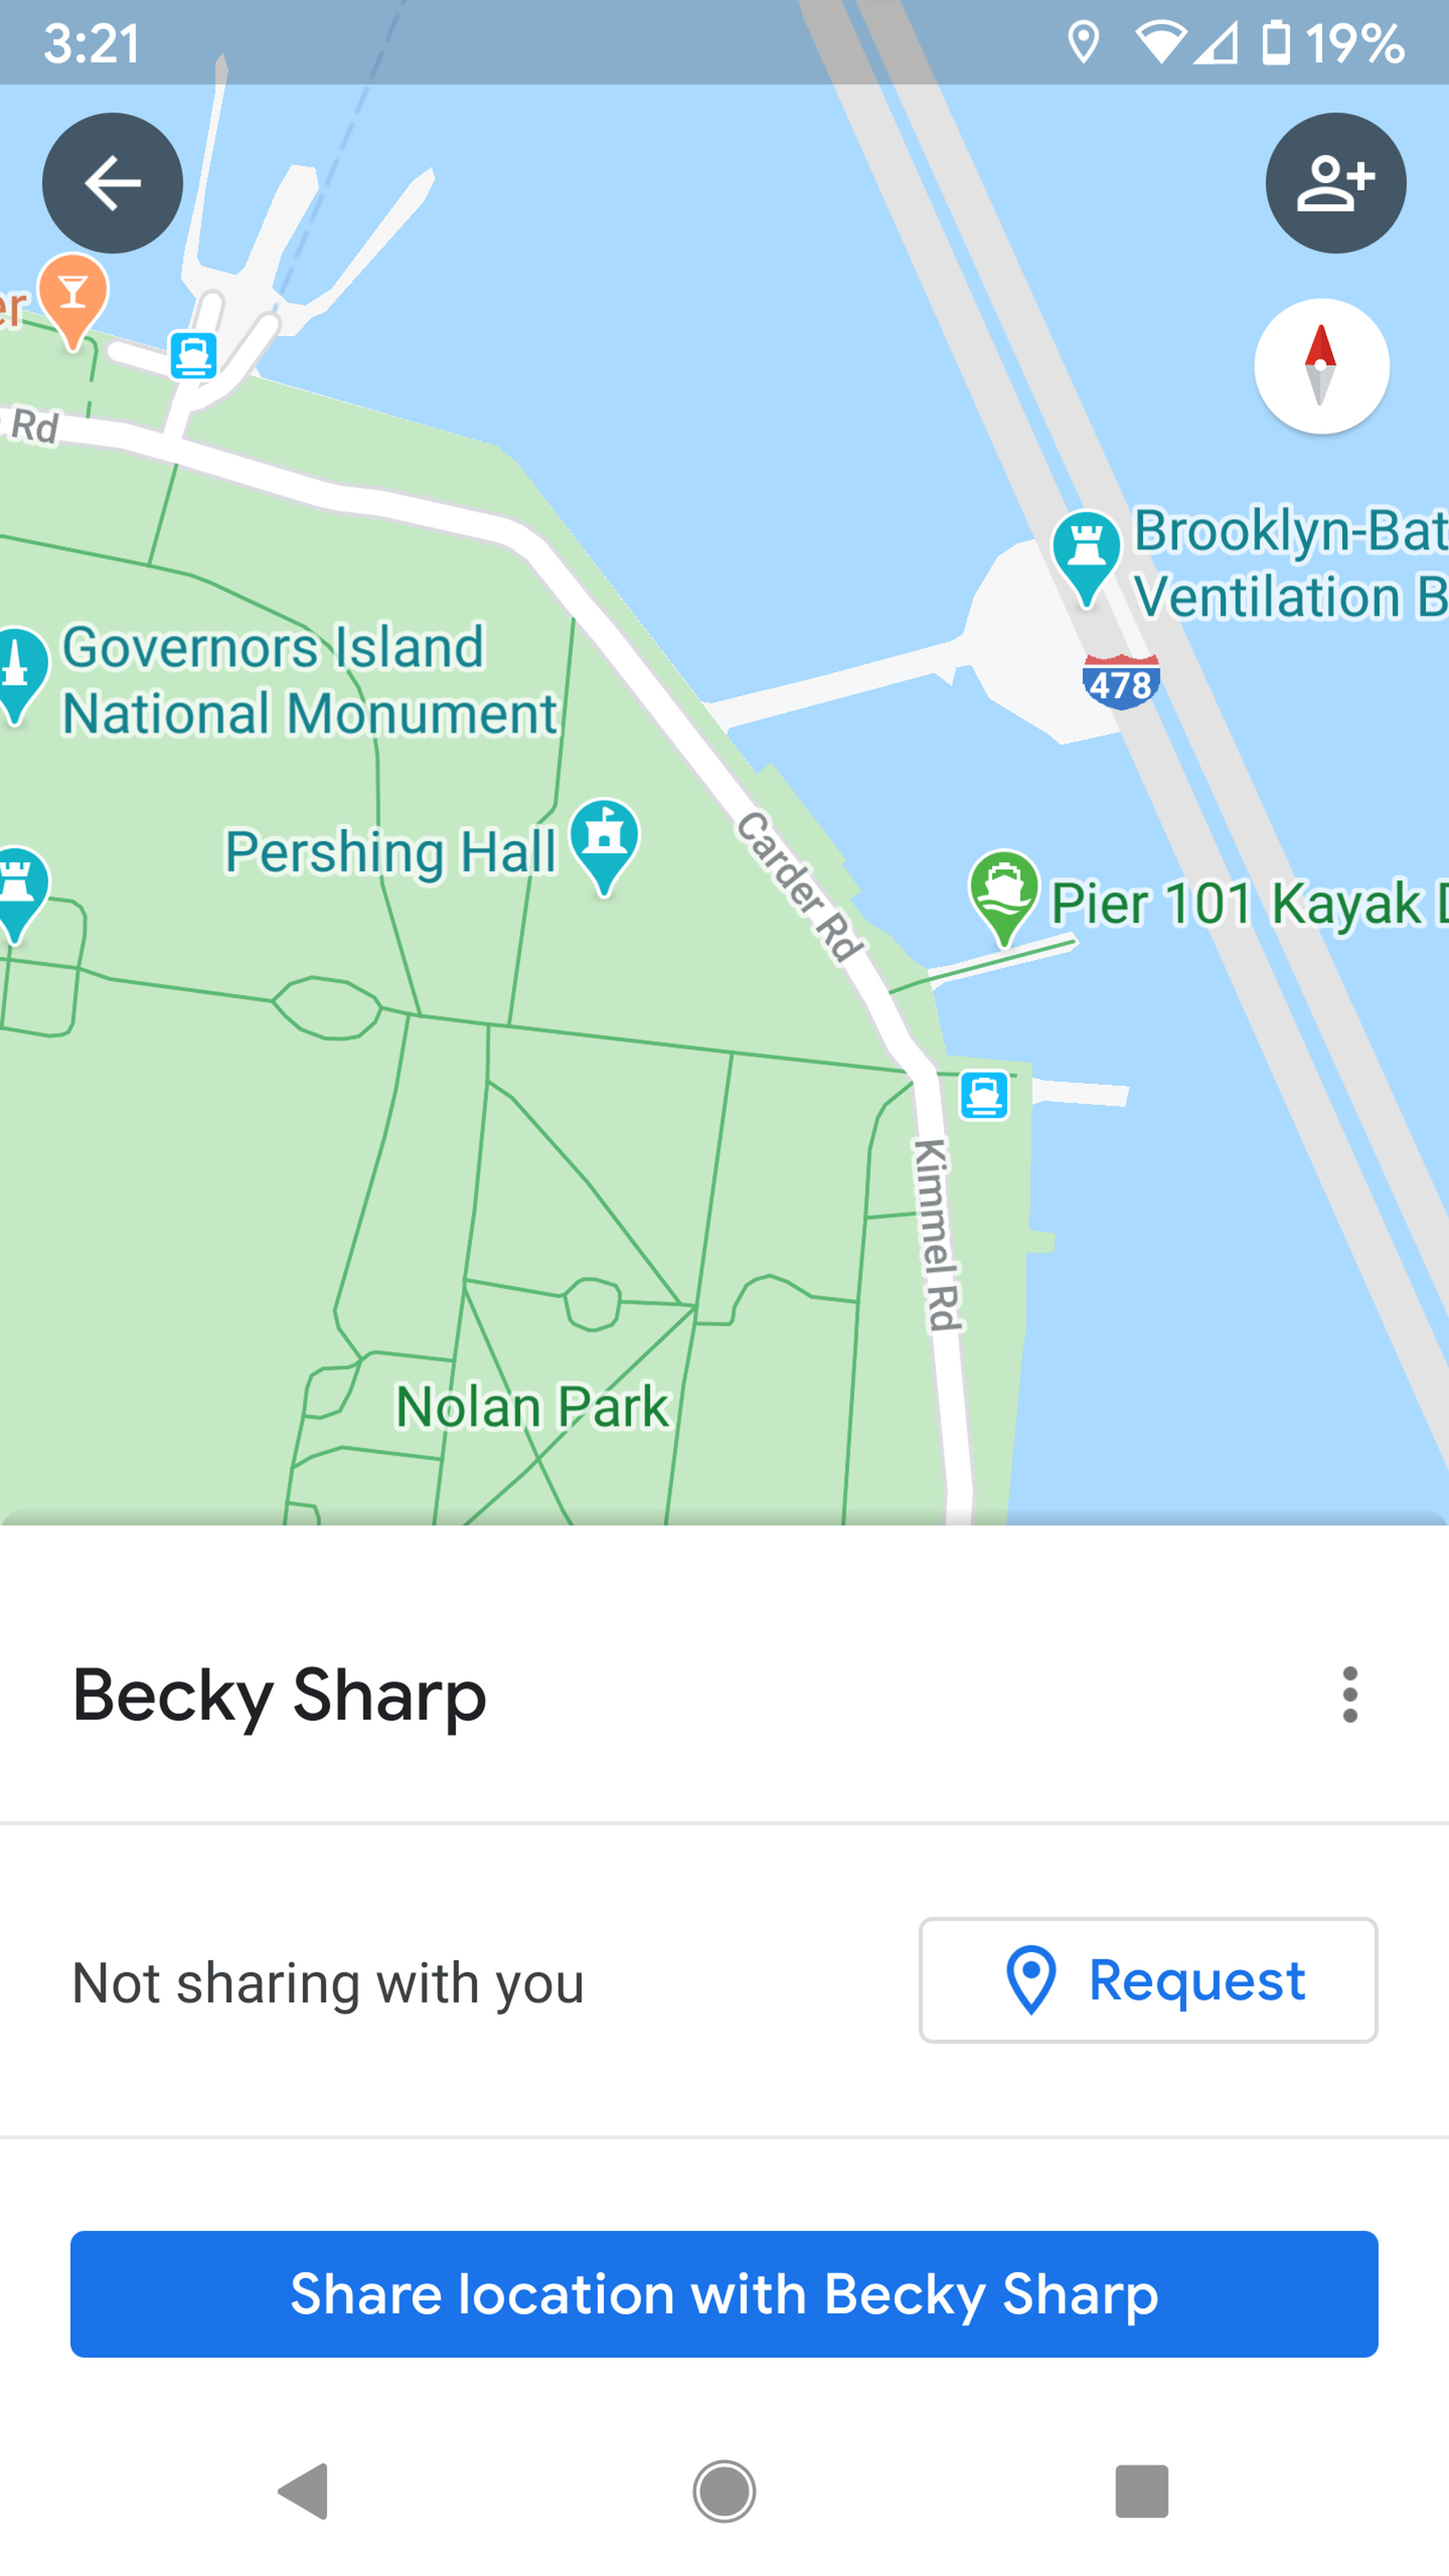 It’s simple to re-share you location with your contact.